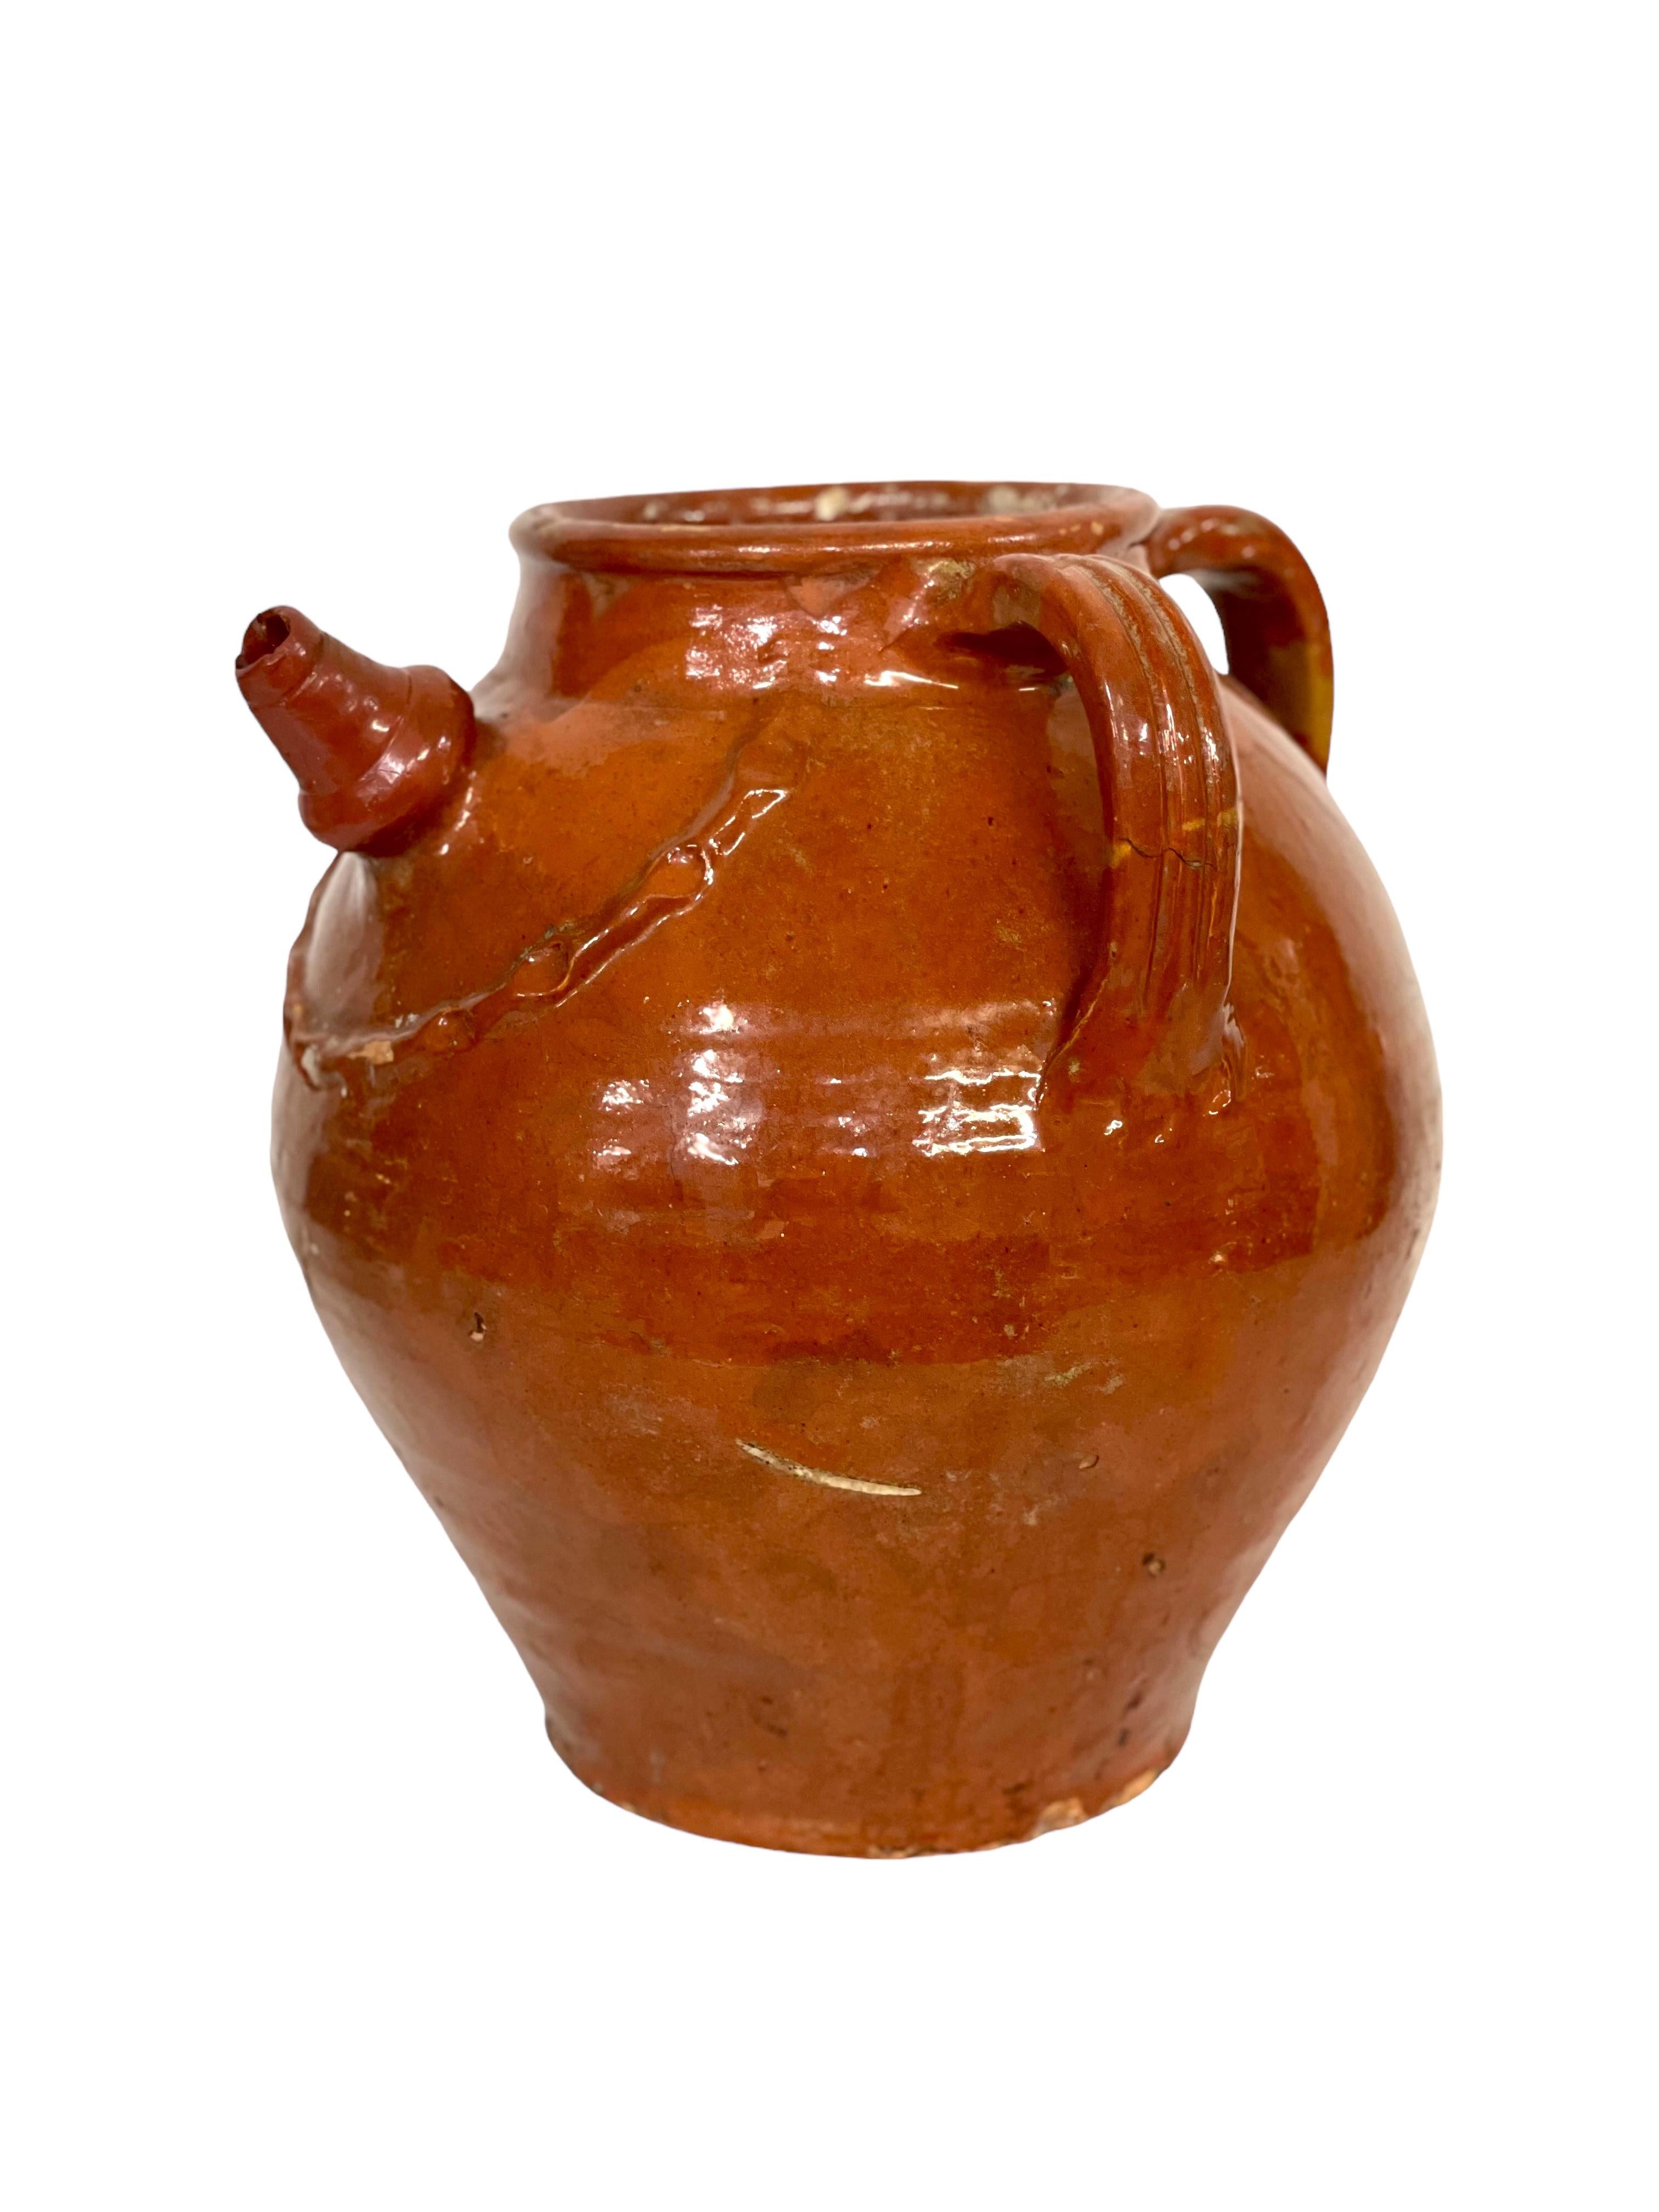 19th Century 19th C. Large French TerracottaJug with Three Handles, from Dordogne Region For Sale